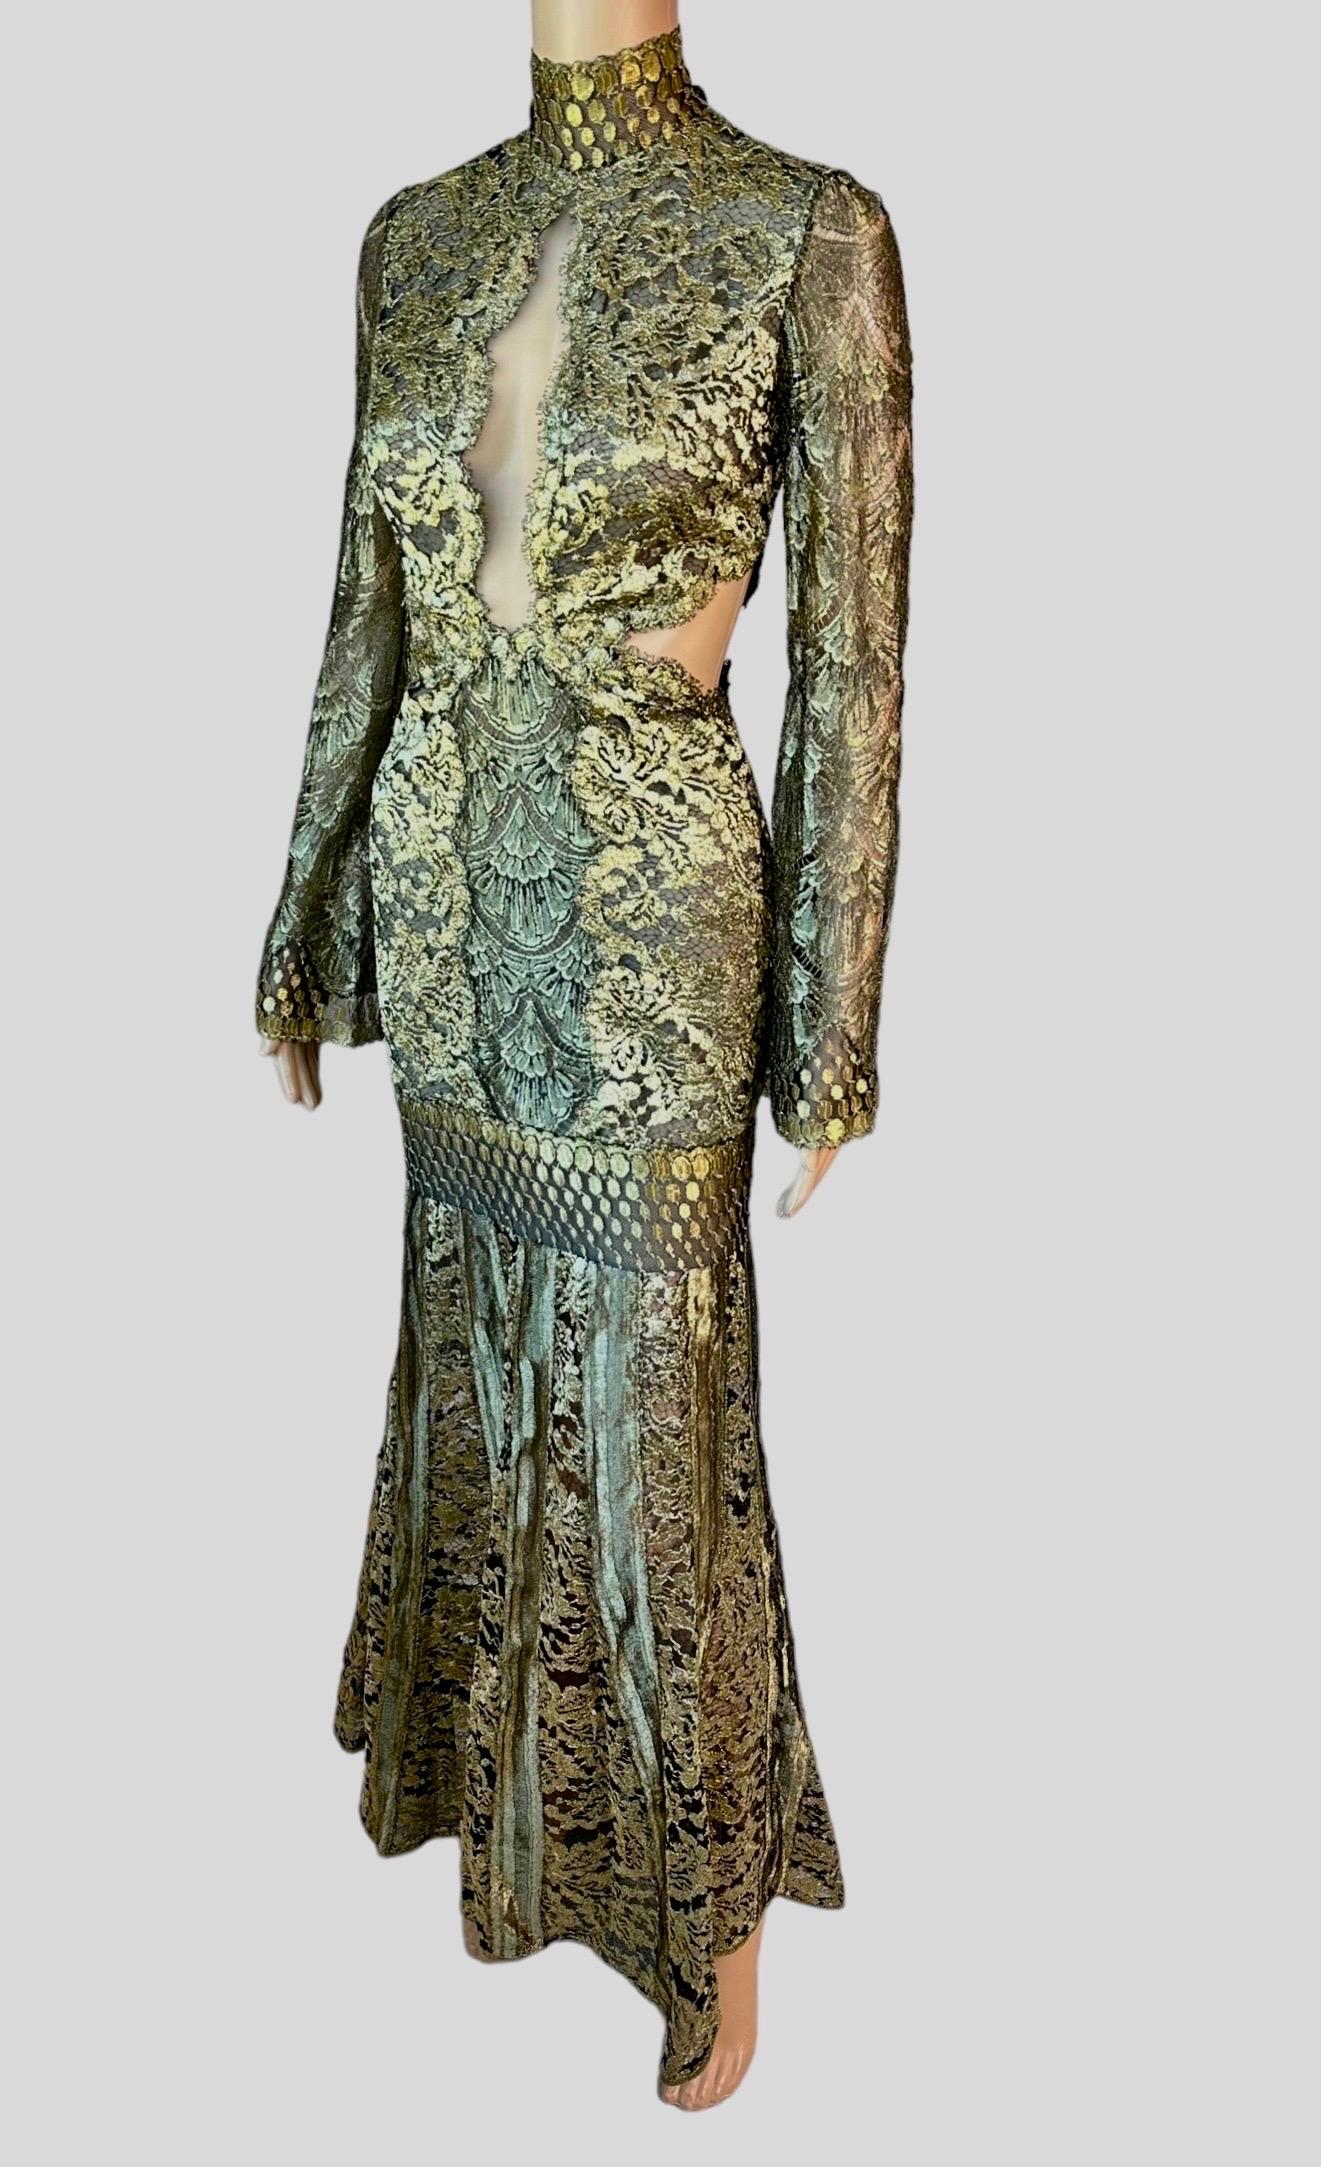 Roberto Cavalli F/W 2016 Runway Gold Sheer Lace Evening Dress Gown For Sale 2